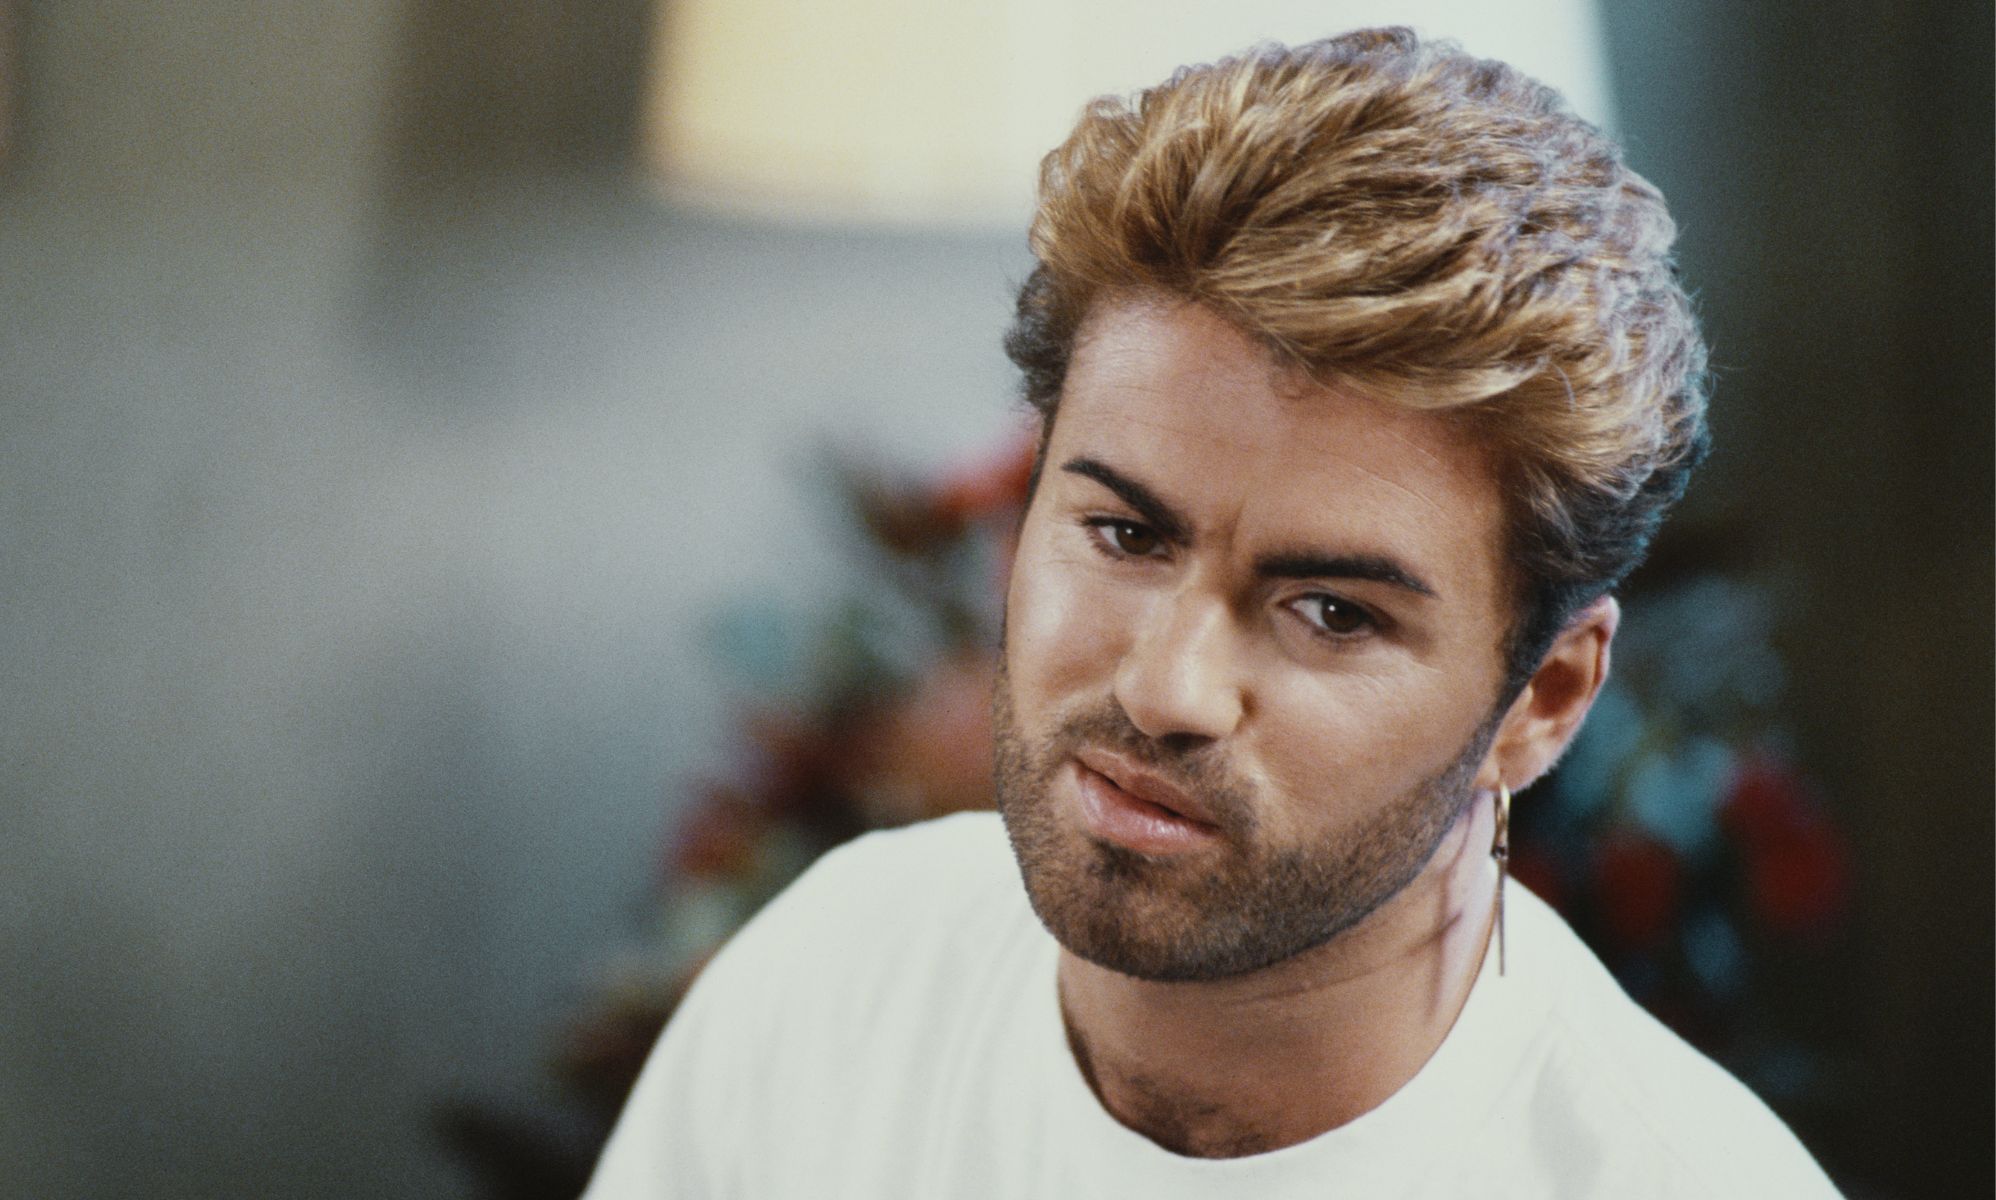 Gay Pop Legend George Michael to Be Immortalized in Rock & Roll